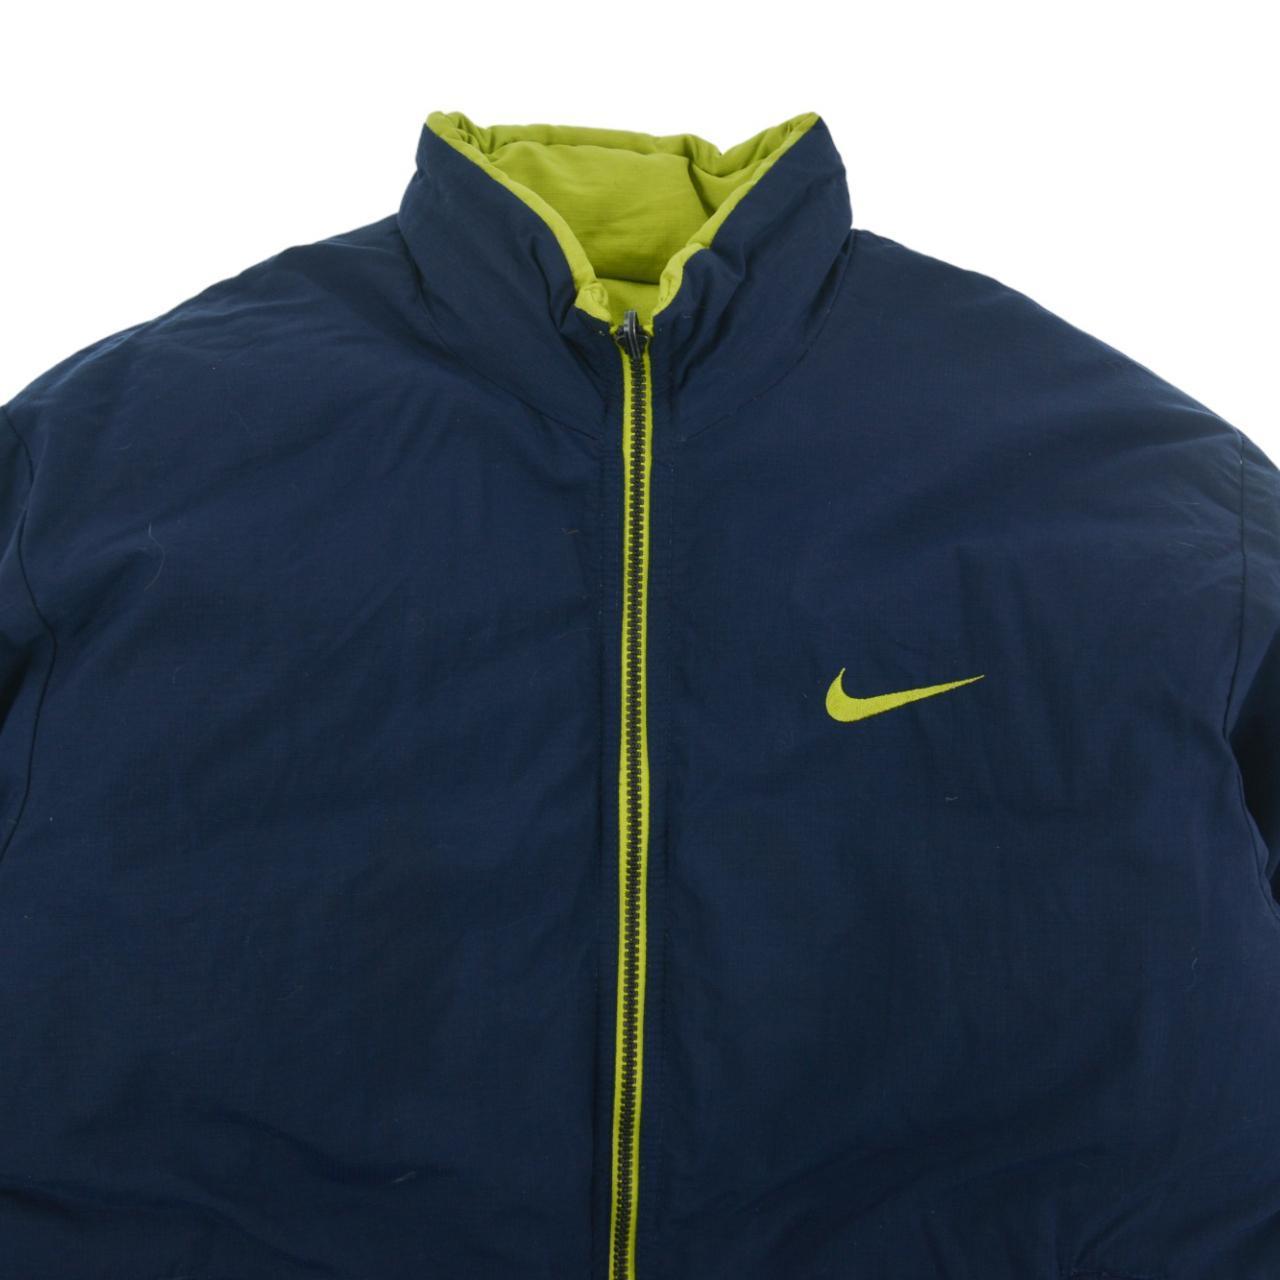 Vintage Nike Reversible Puffer Jacket Size M - Known Source